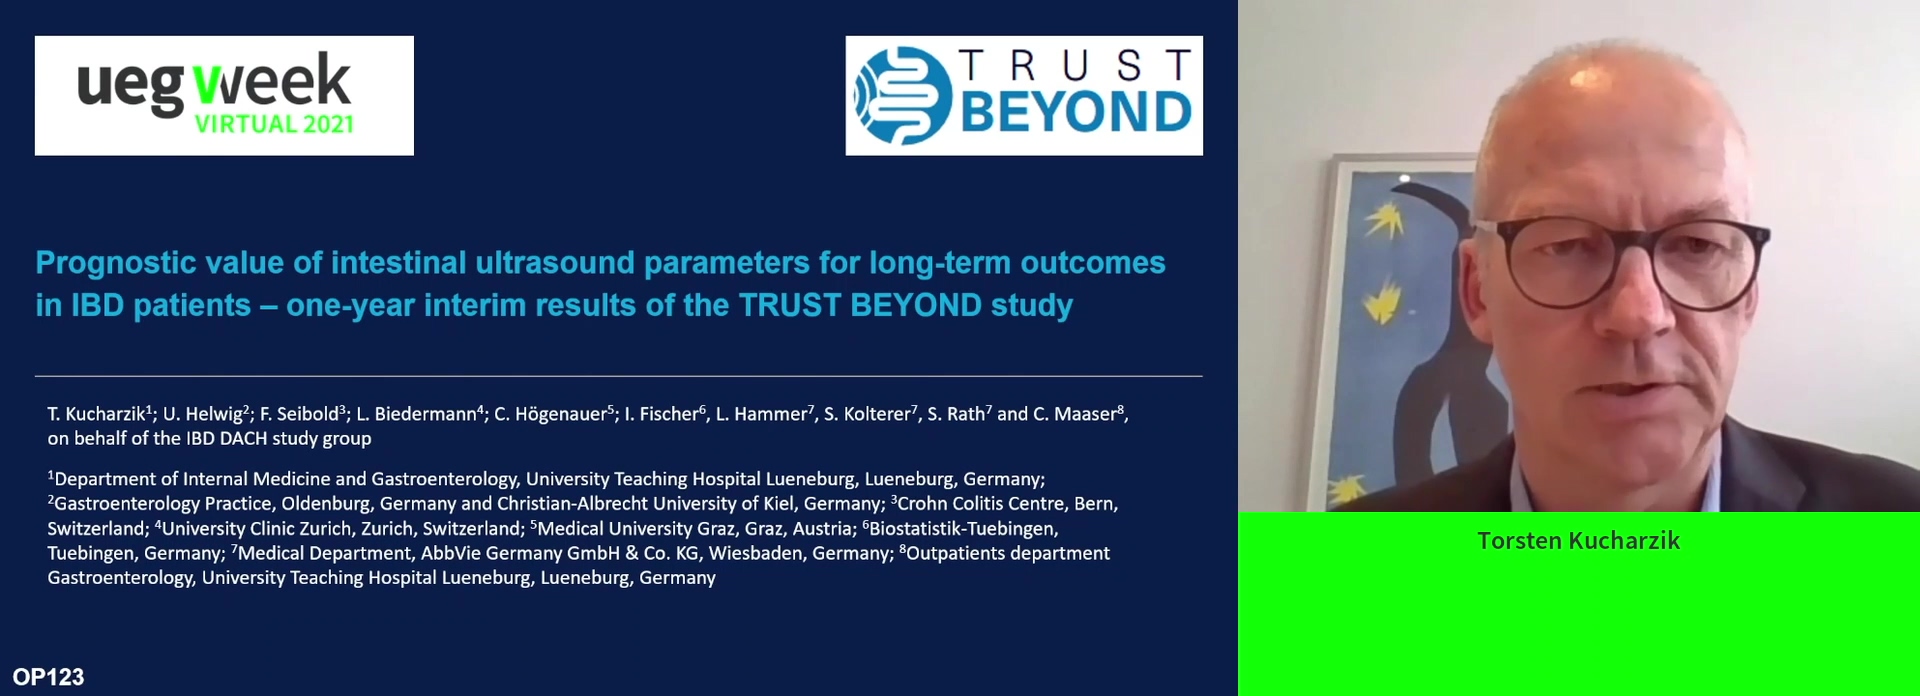 PROGNOSTIC VALUE OF INTESTINAL ULTRASOUND PARAMETERS FOR LONG-TERM OUTCOMES IN IBD PATIENTS – ONE YEAR INTERIM RESULTS OF THE TRUST BEYOND STUDY